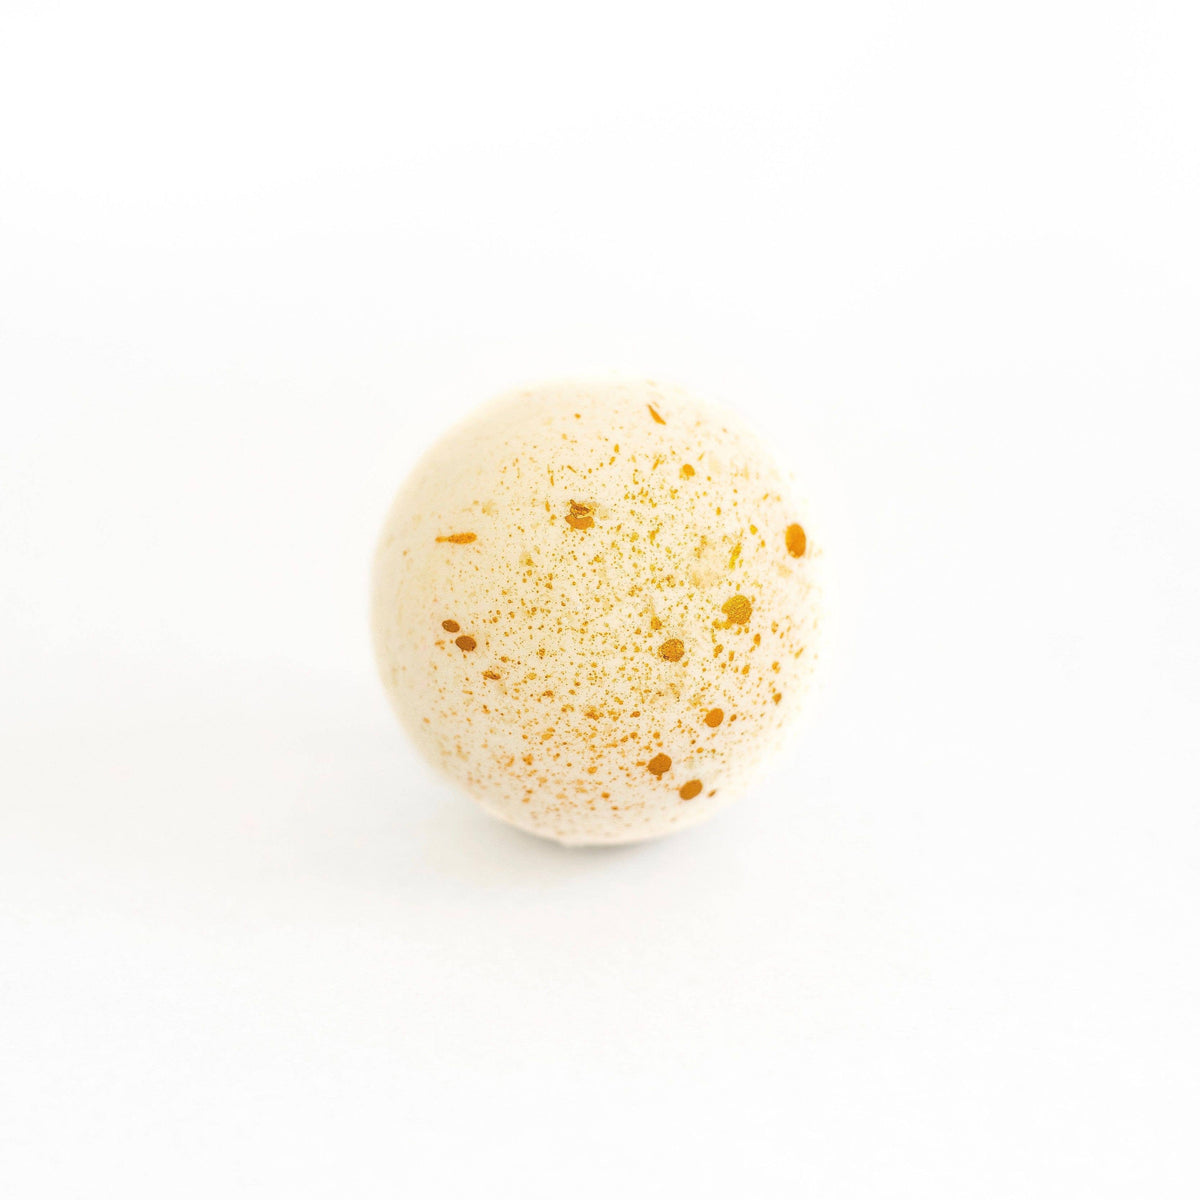 A single SOAK Bath Co. - Coffee Bean Bath Bomb centered on a plain white background, reminiscent of a cozy Sunday morning.